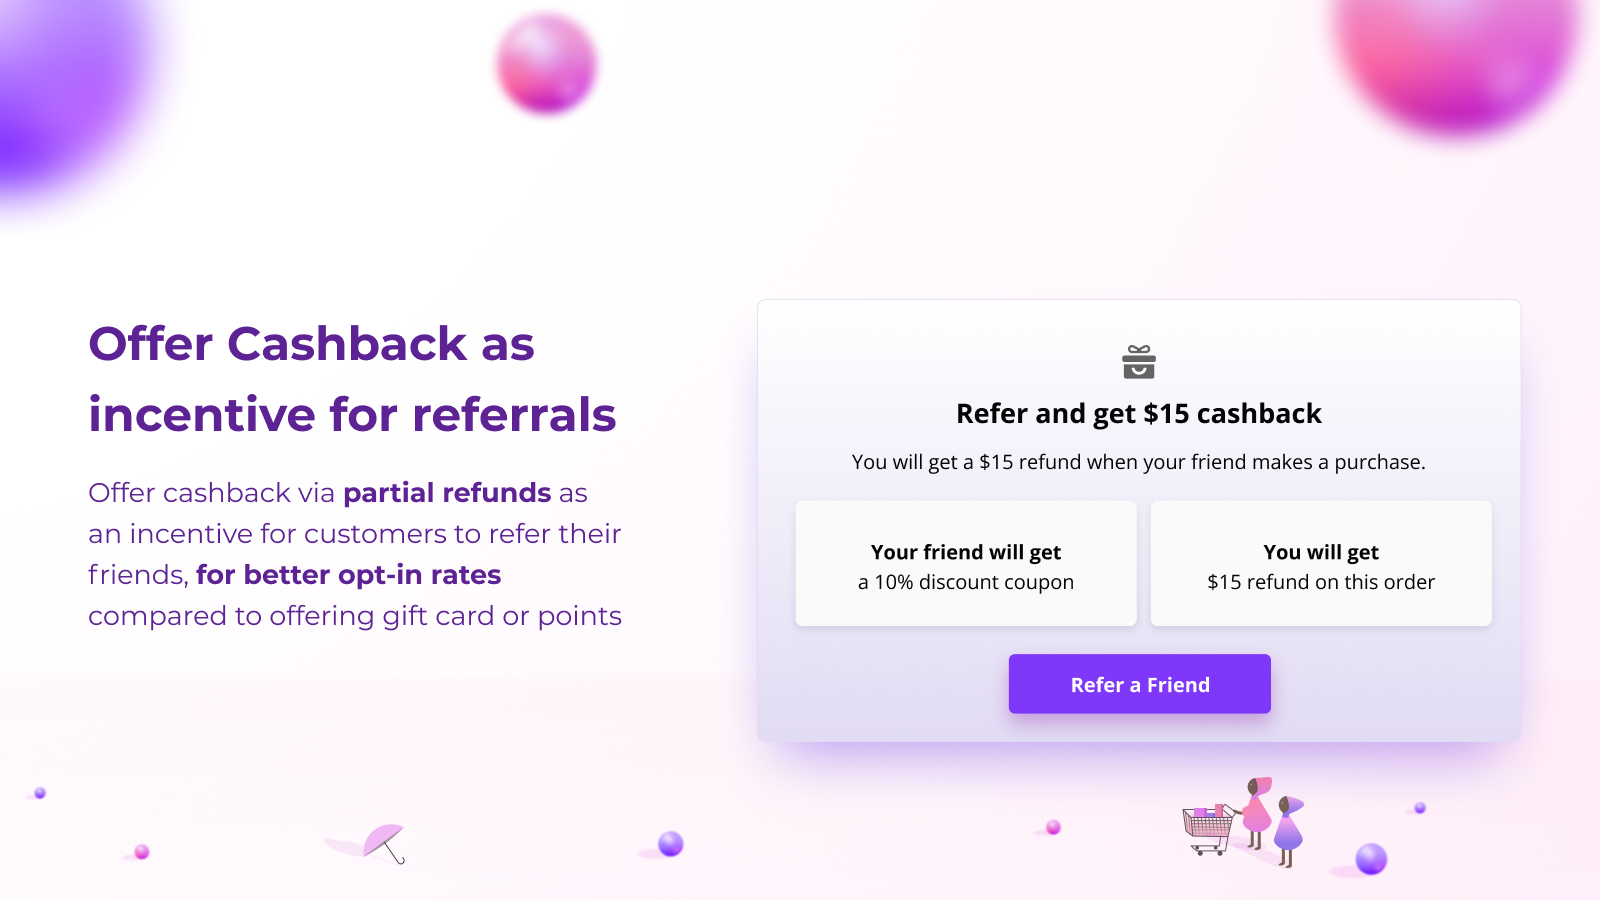 Offer Cashback as incentive for referrals